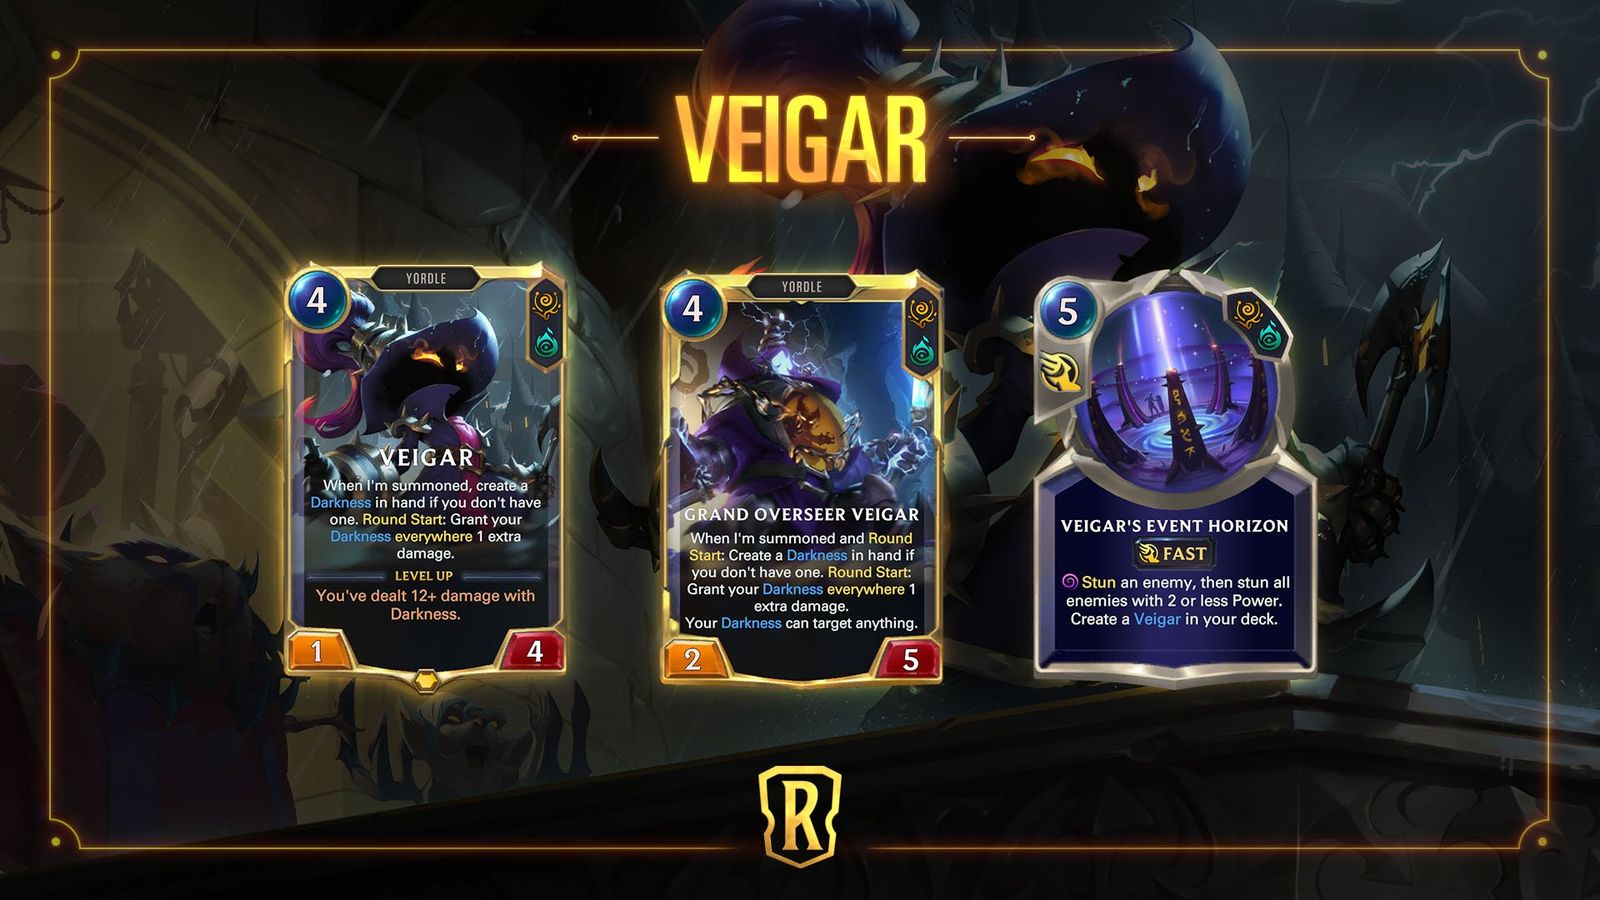 Veigar's card from Legends of Runeterra, alongside his levelled up card and Event Horizon spell.